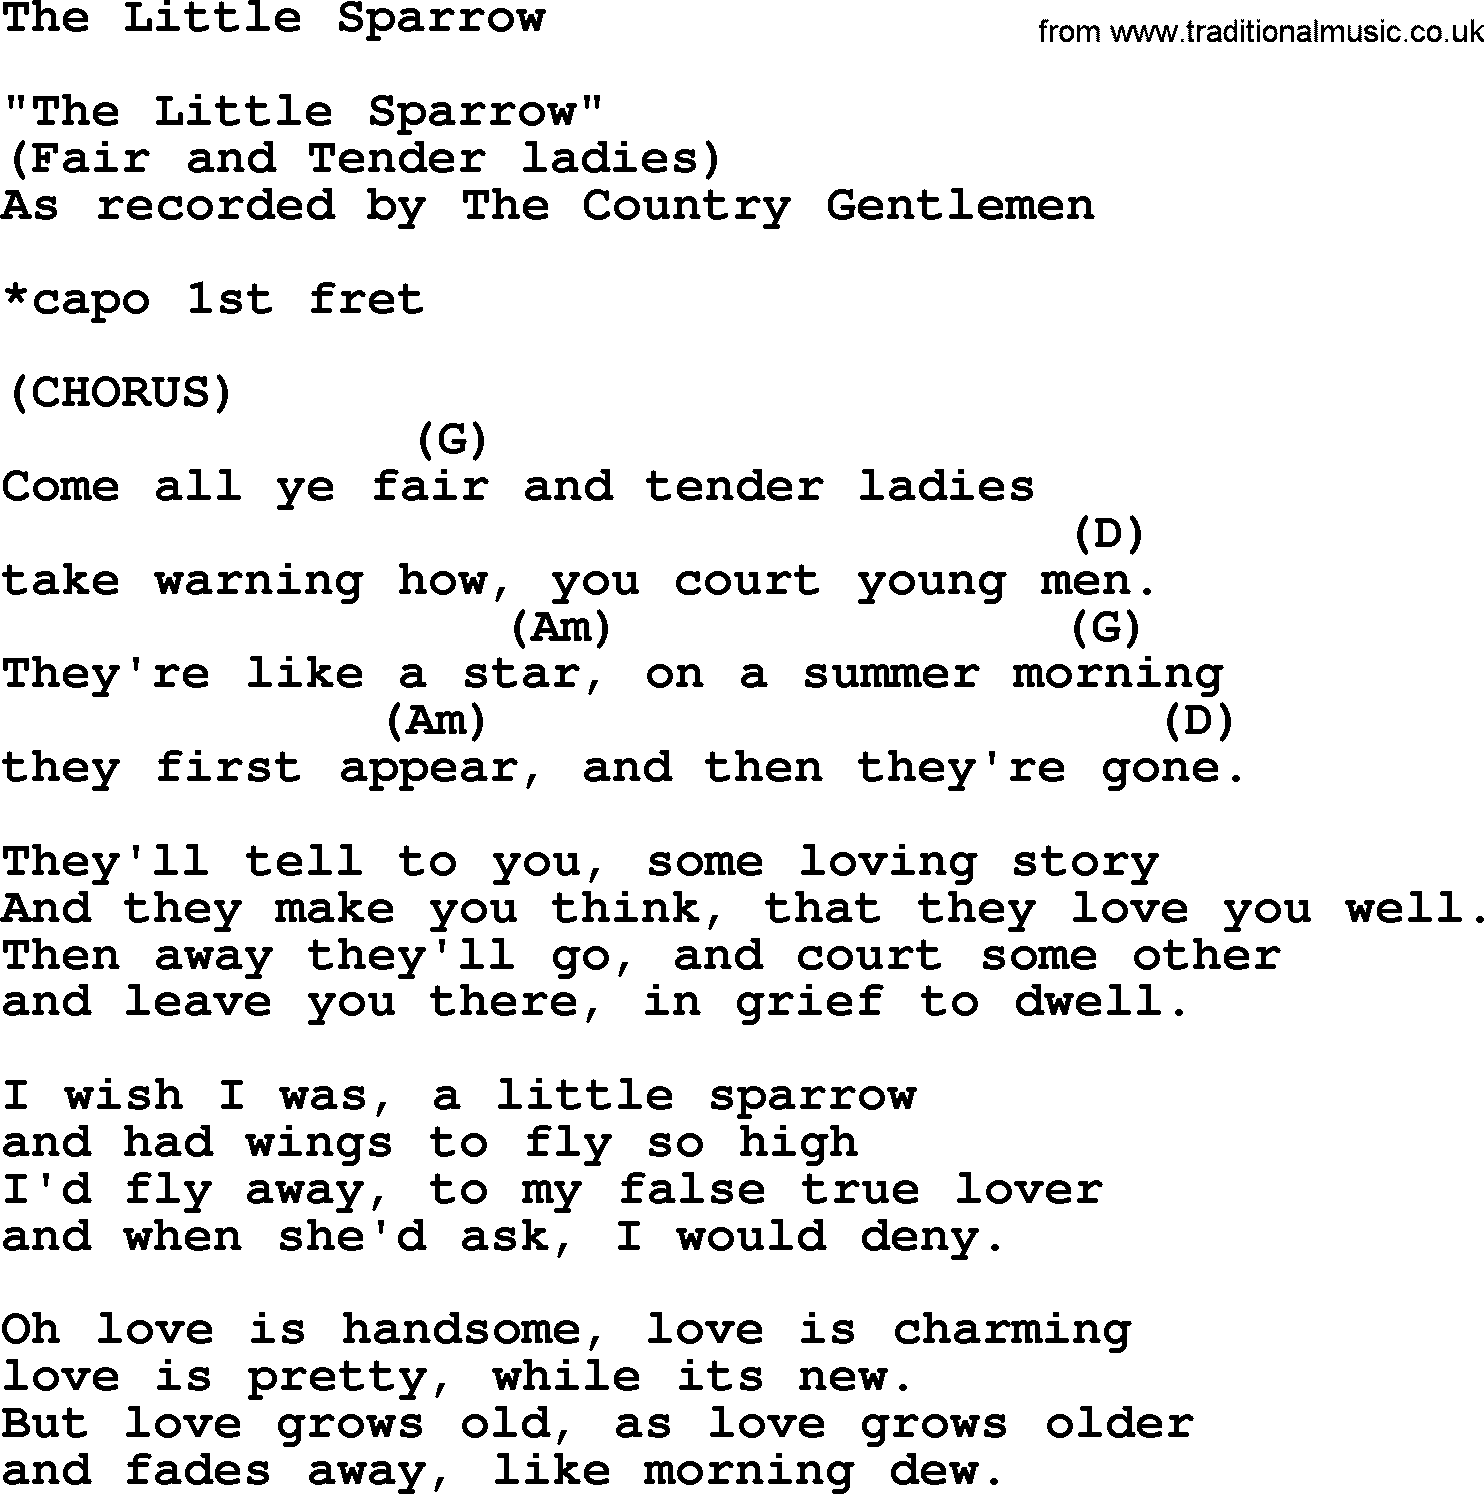 Bluegrass song: The Little Sparrow, lyrics and chords